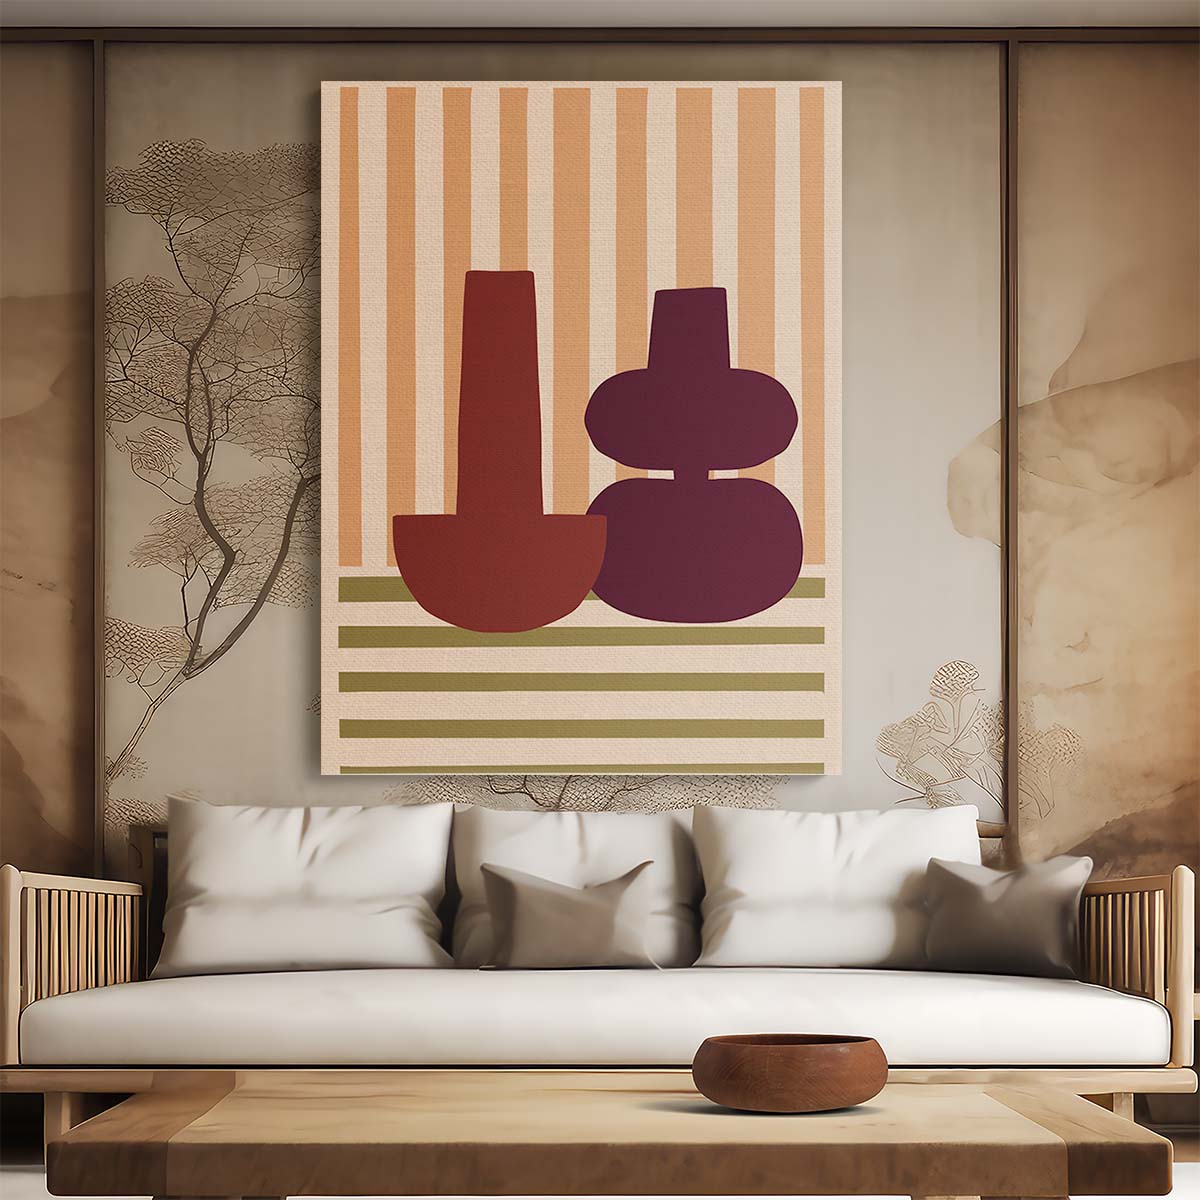 Geometric Abstract Illustration of Purple Vases by Margaux Fugier by Luxuriance Designs, made in USA